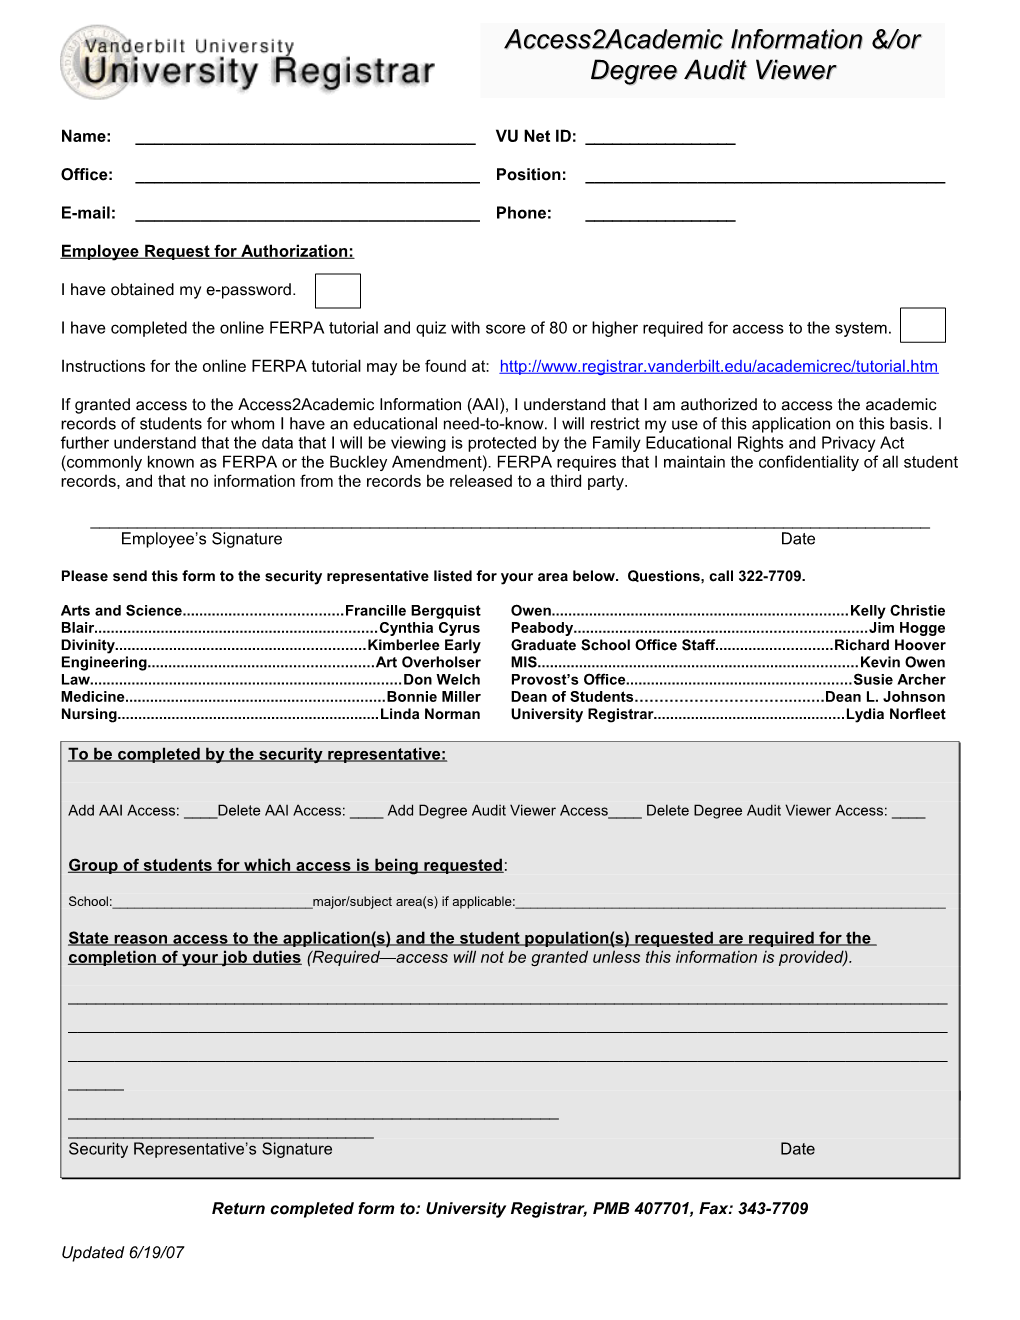 Employee Request for Authorization